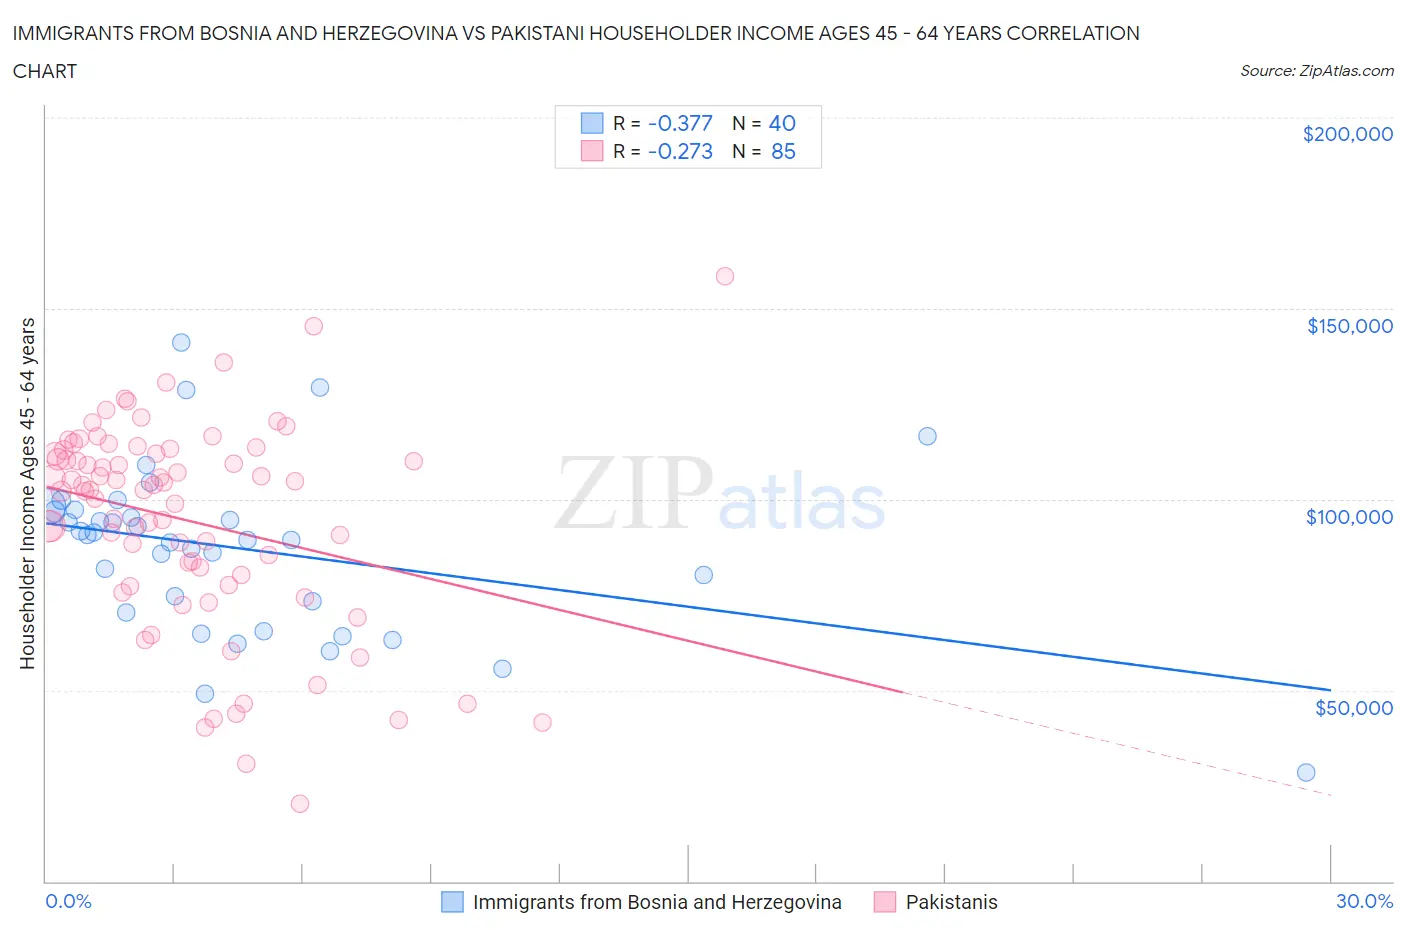 Immigrants from Bosnia and Herzegovina vs Pakistani Householder Income Ages 45 - 64 years